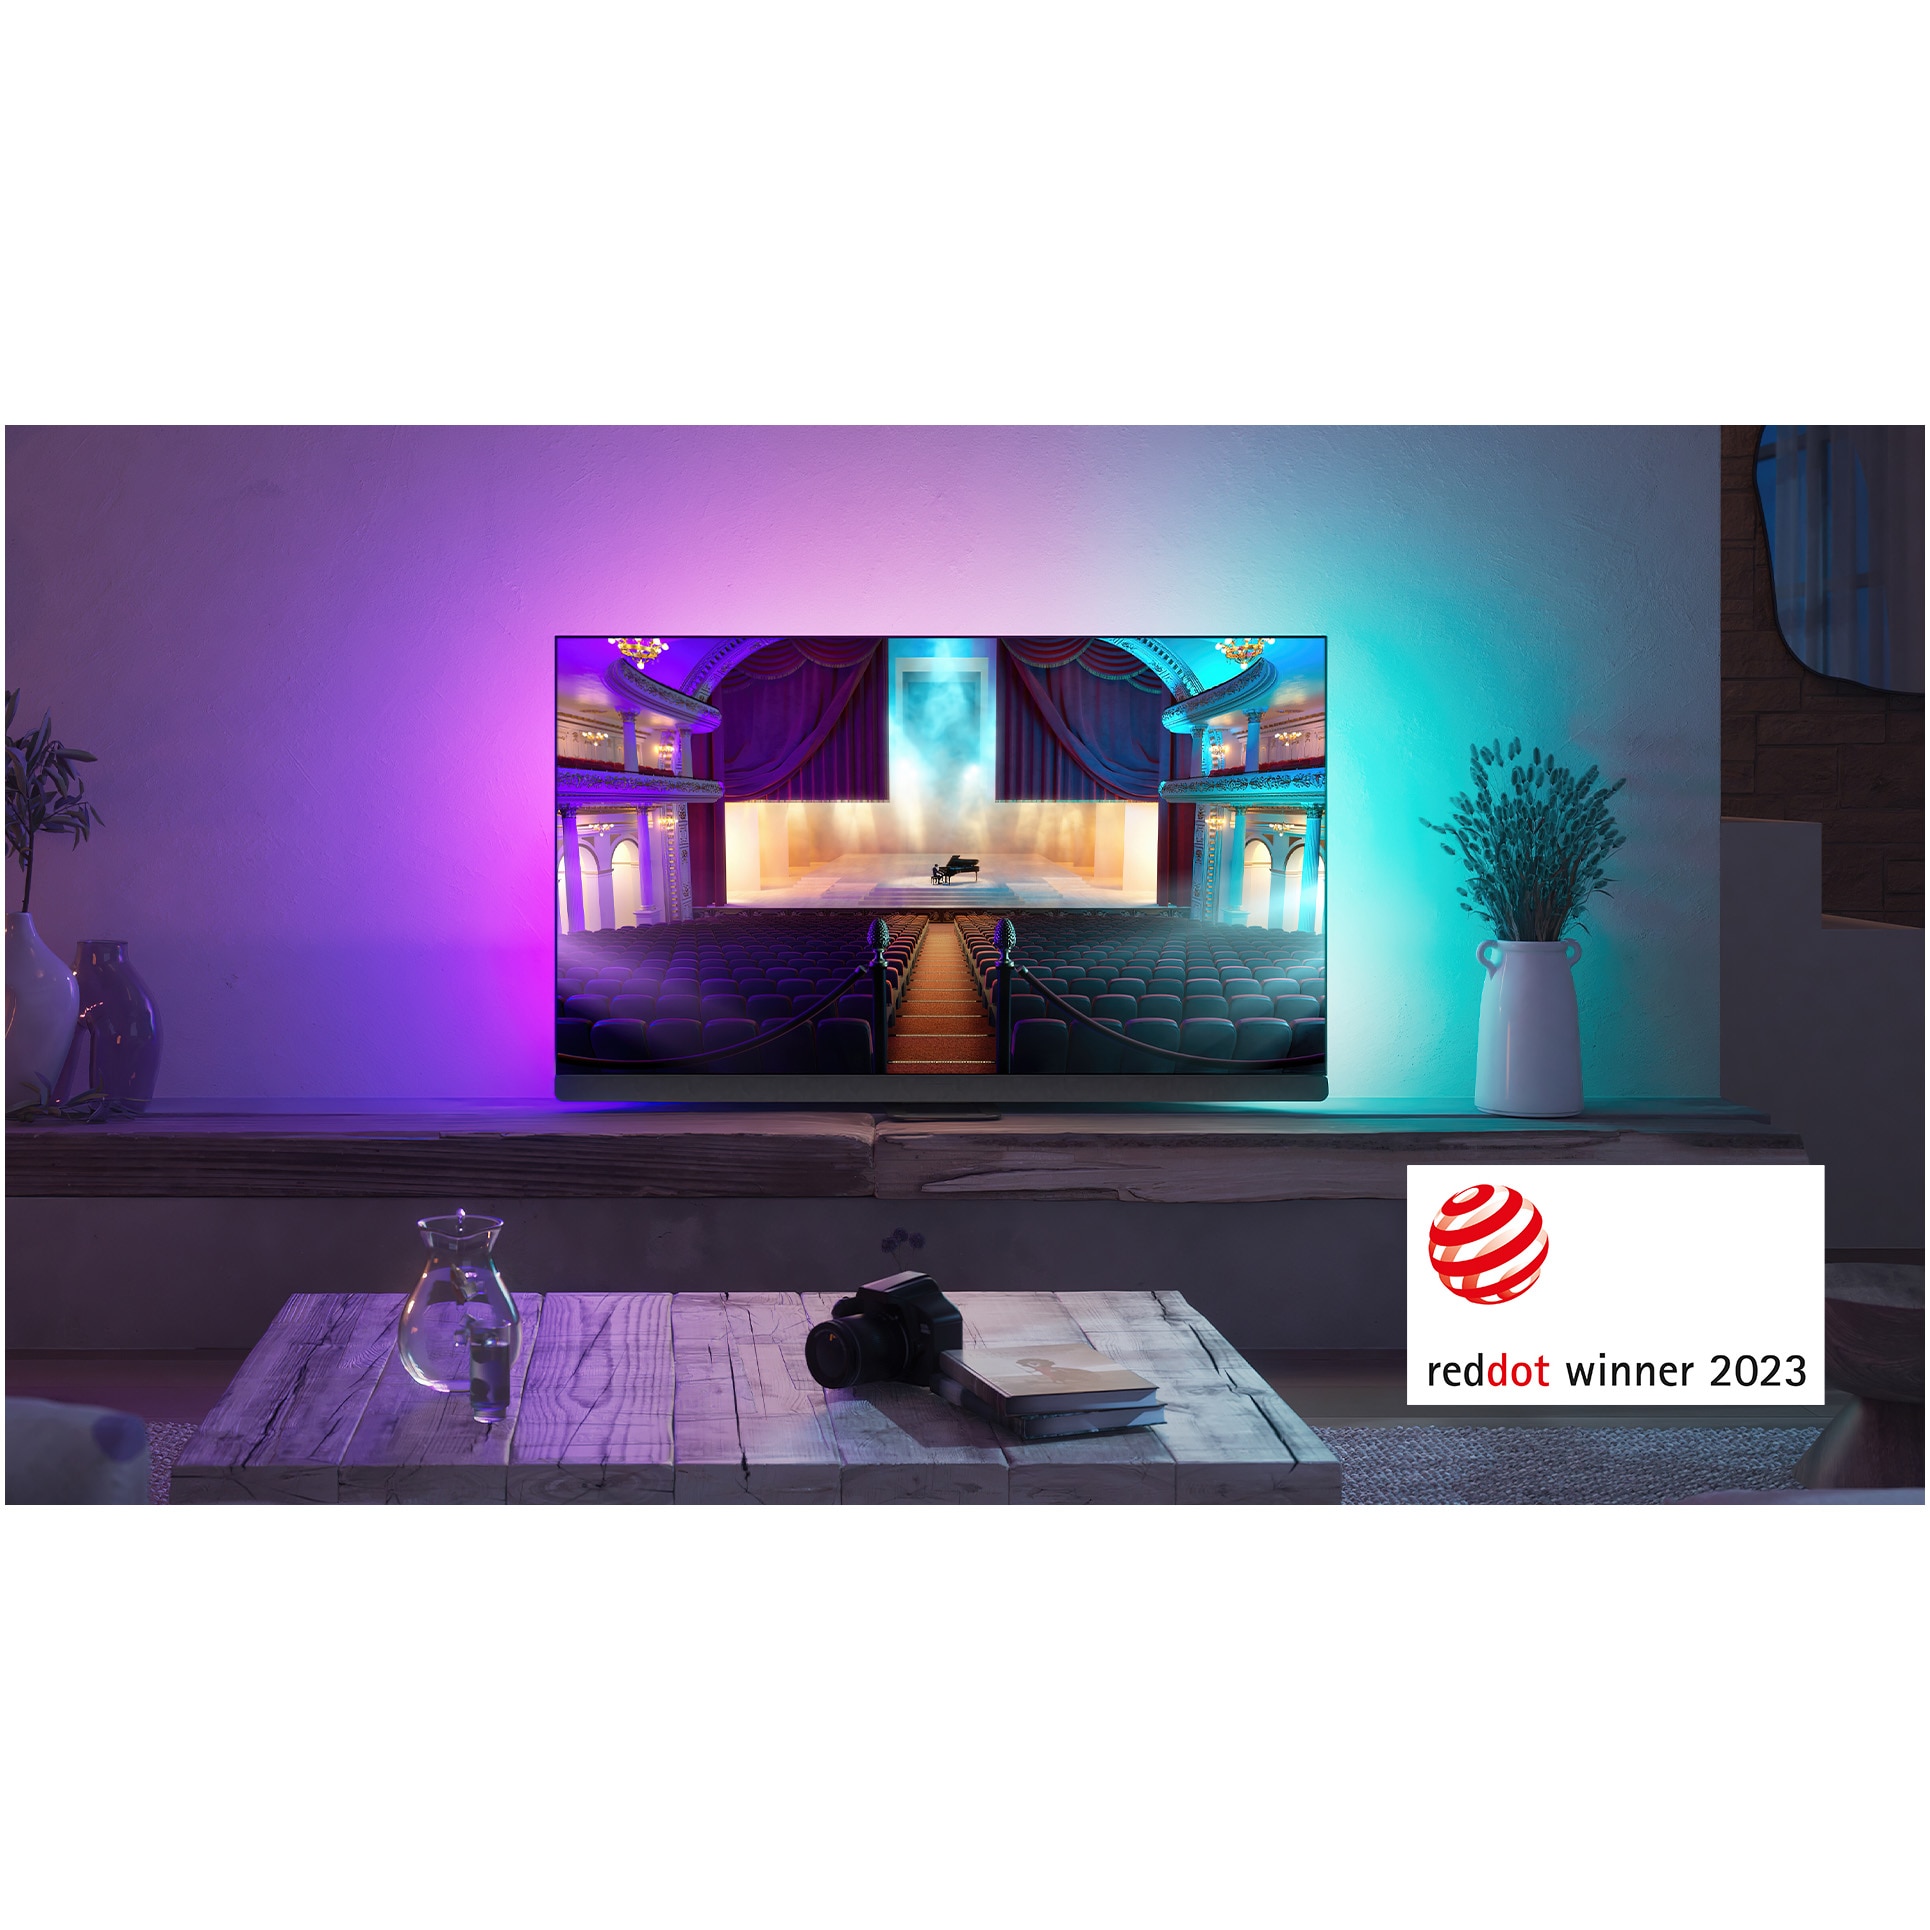 Philips 55OLED908 UHD 4K 120Hz TV G-Sync Ambilight IMAX HDR10+, Freesync, Vision&Atmos, OLED Bowers&Wilkins, 55\